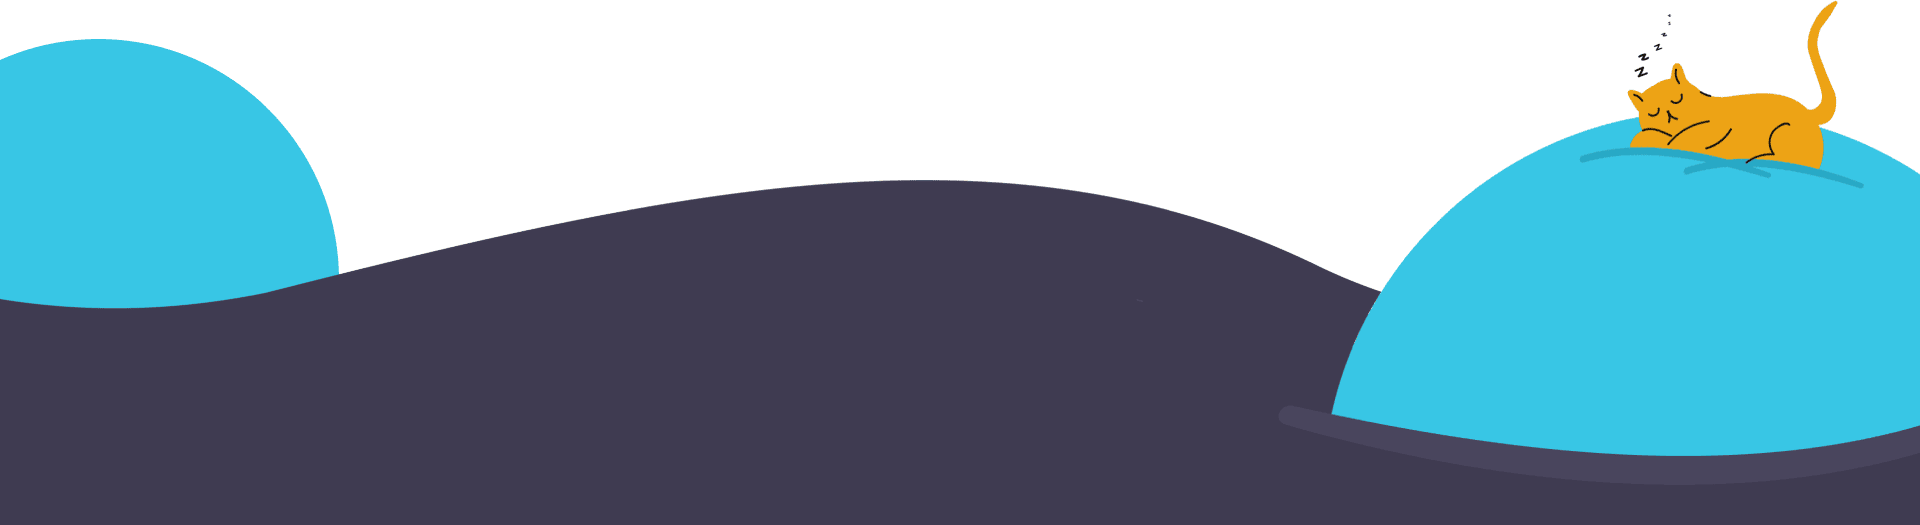 contract top section blob with a cat sleeping image